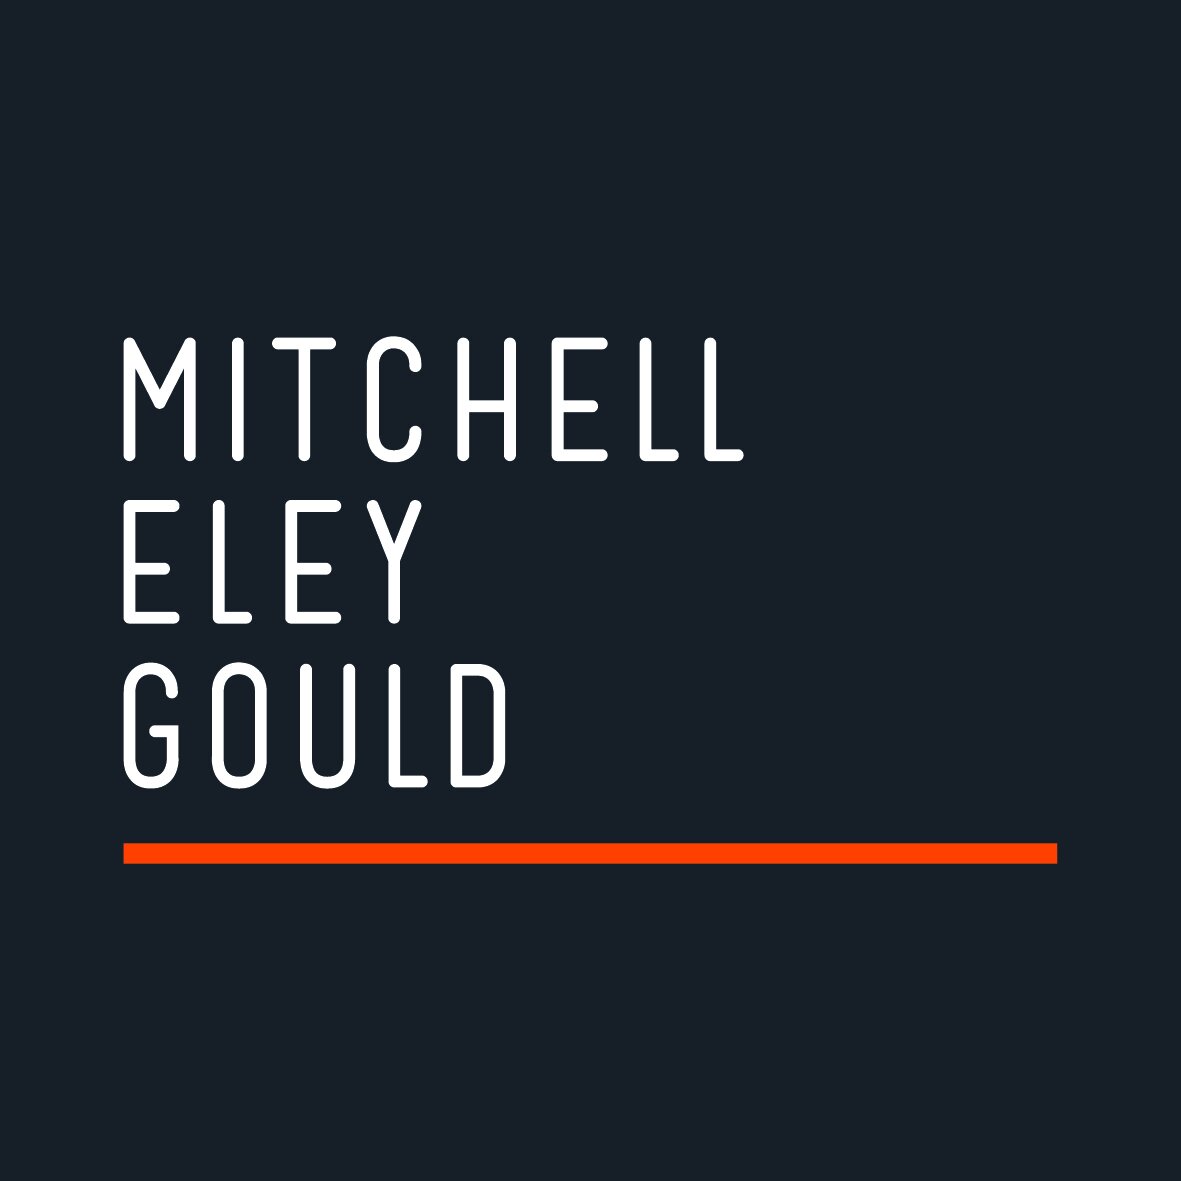 Mitchell Eley Gould Architects